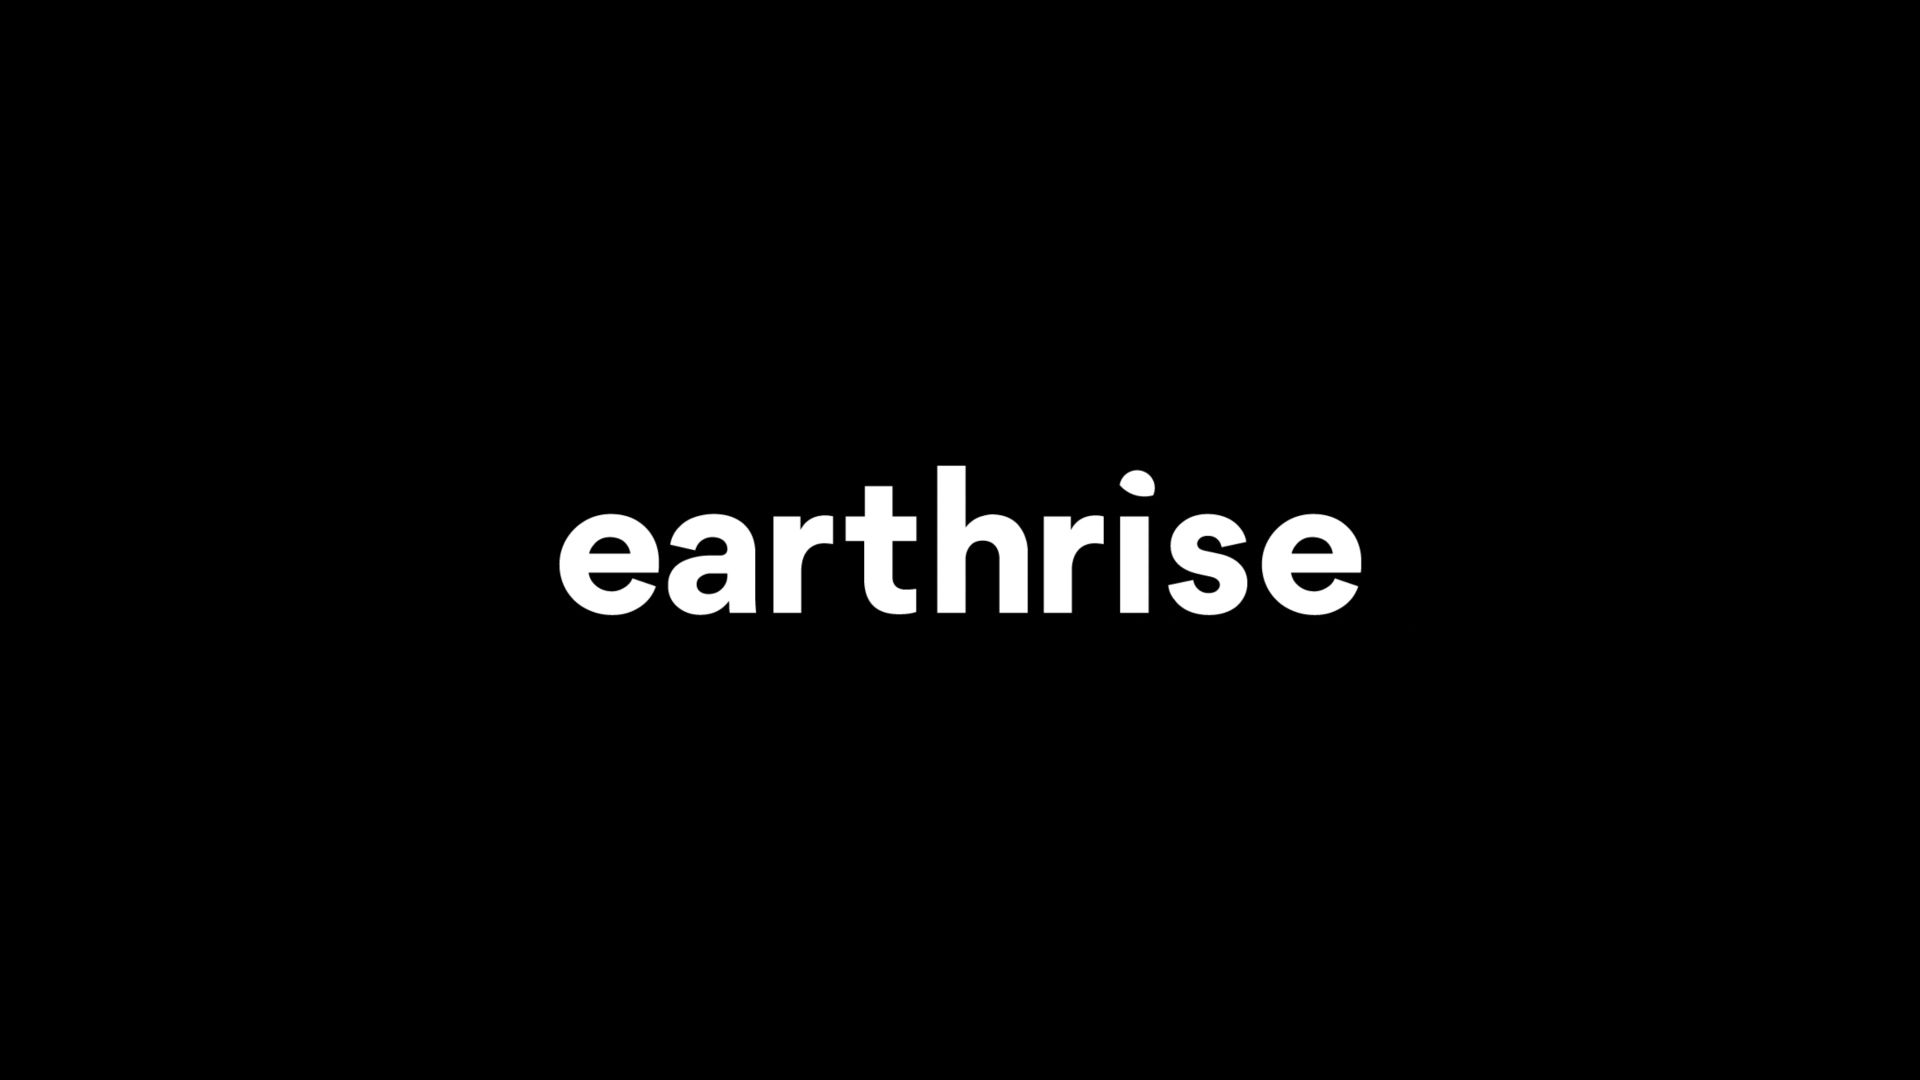 earthrise activation